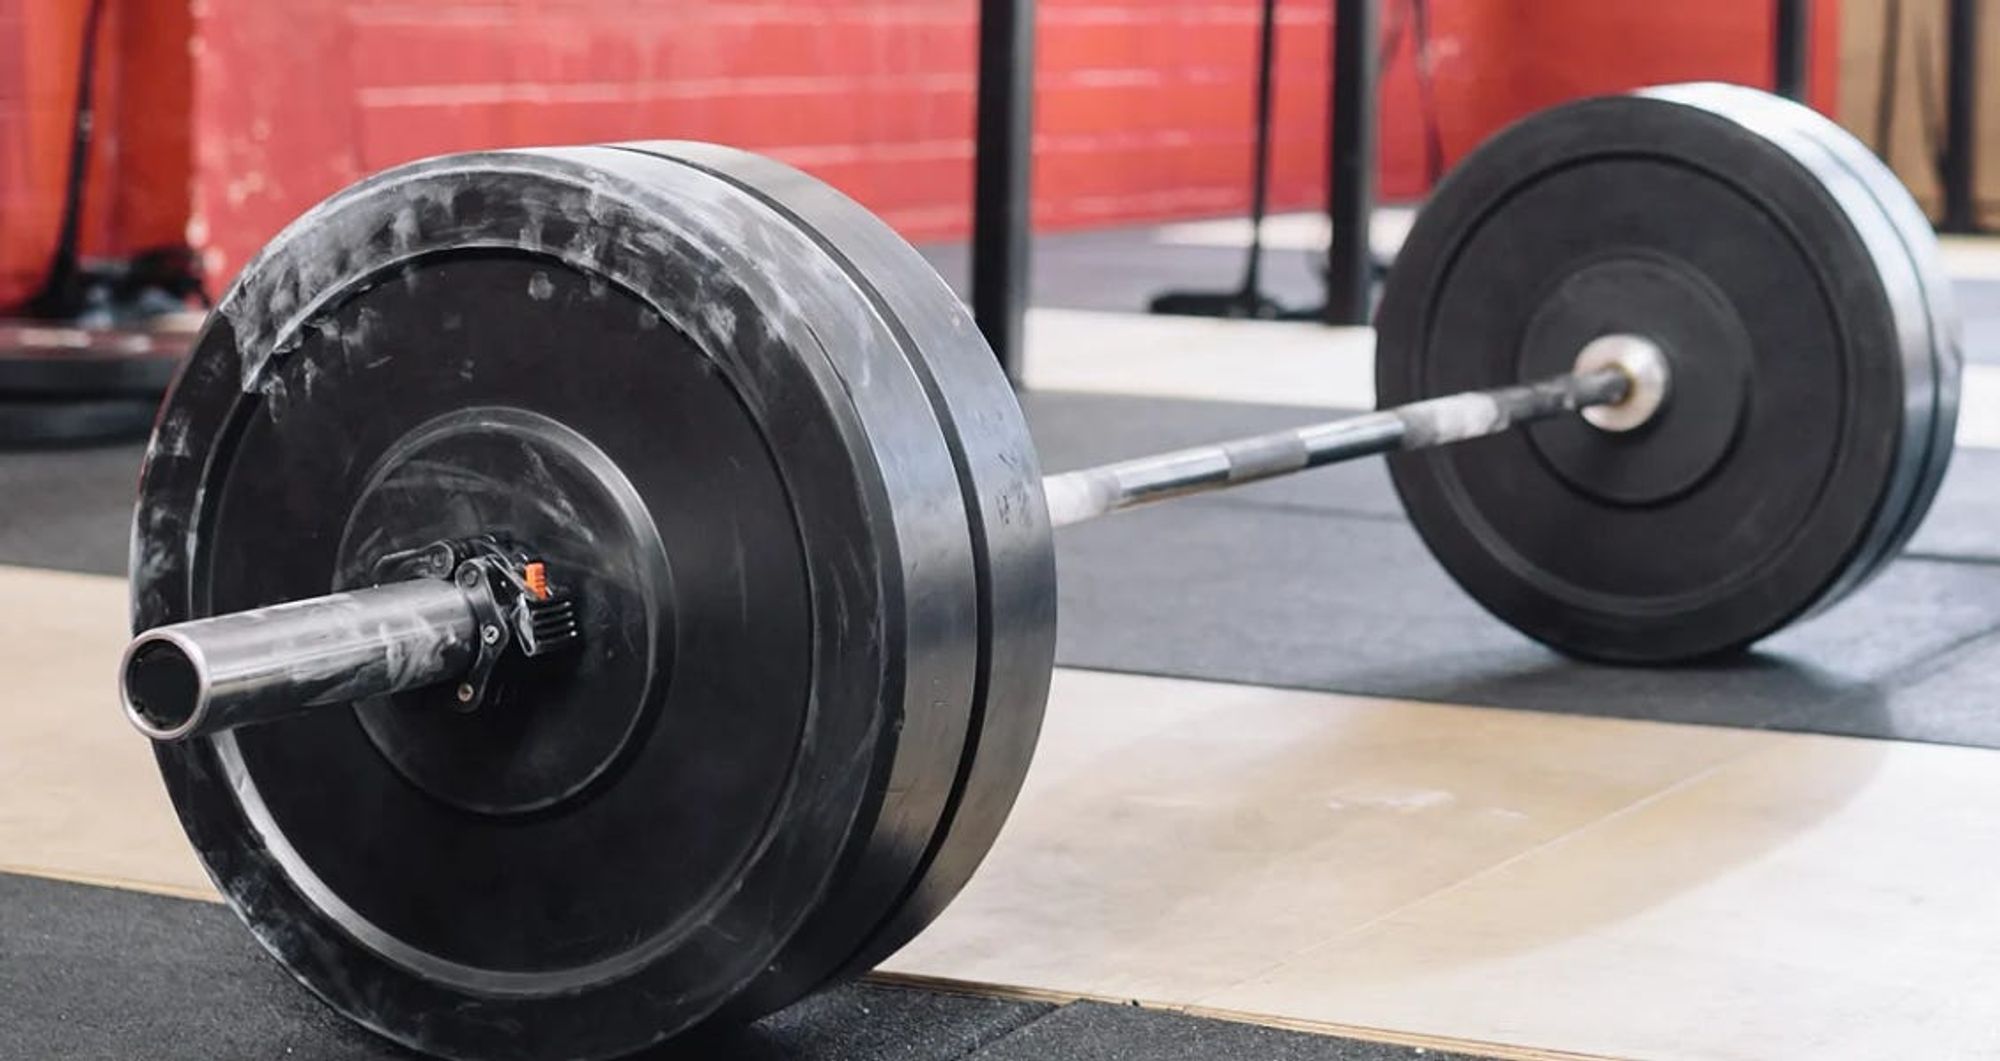 Examples of barbell strategies